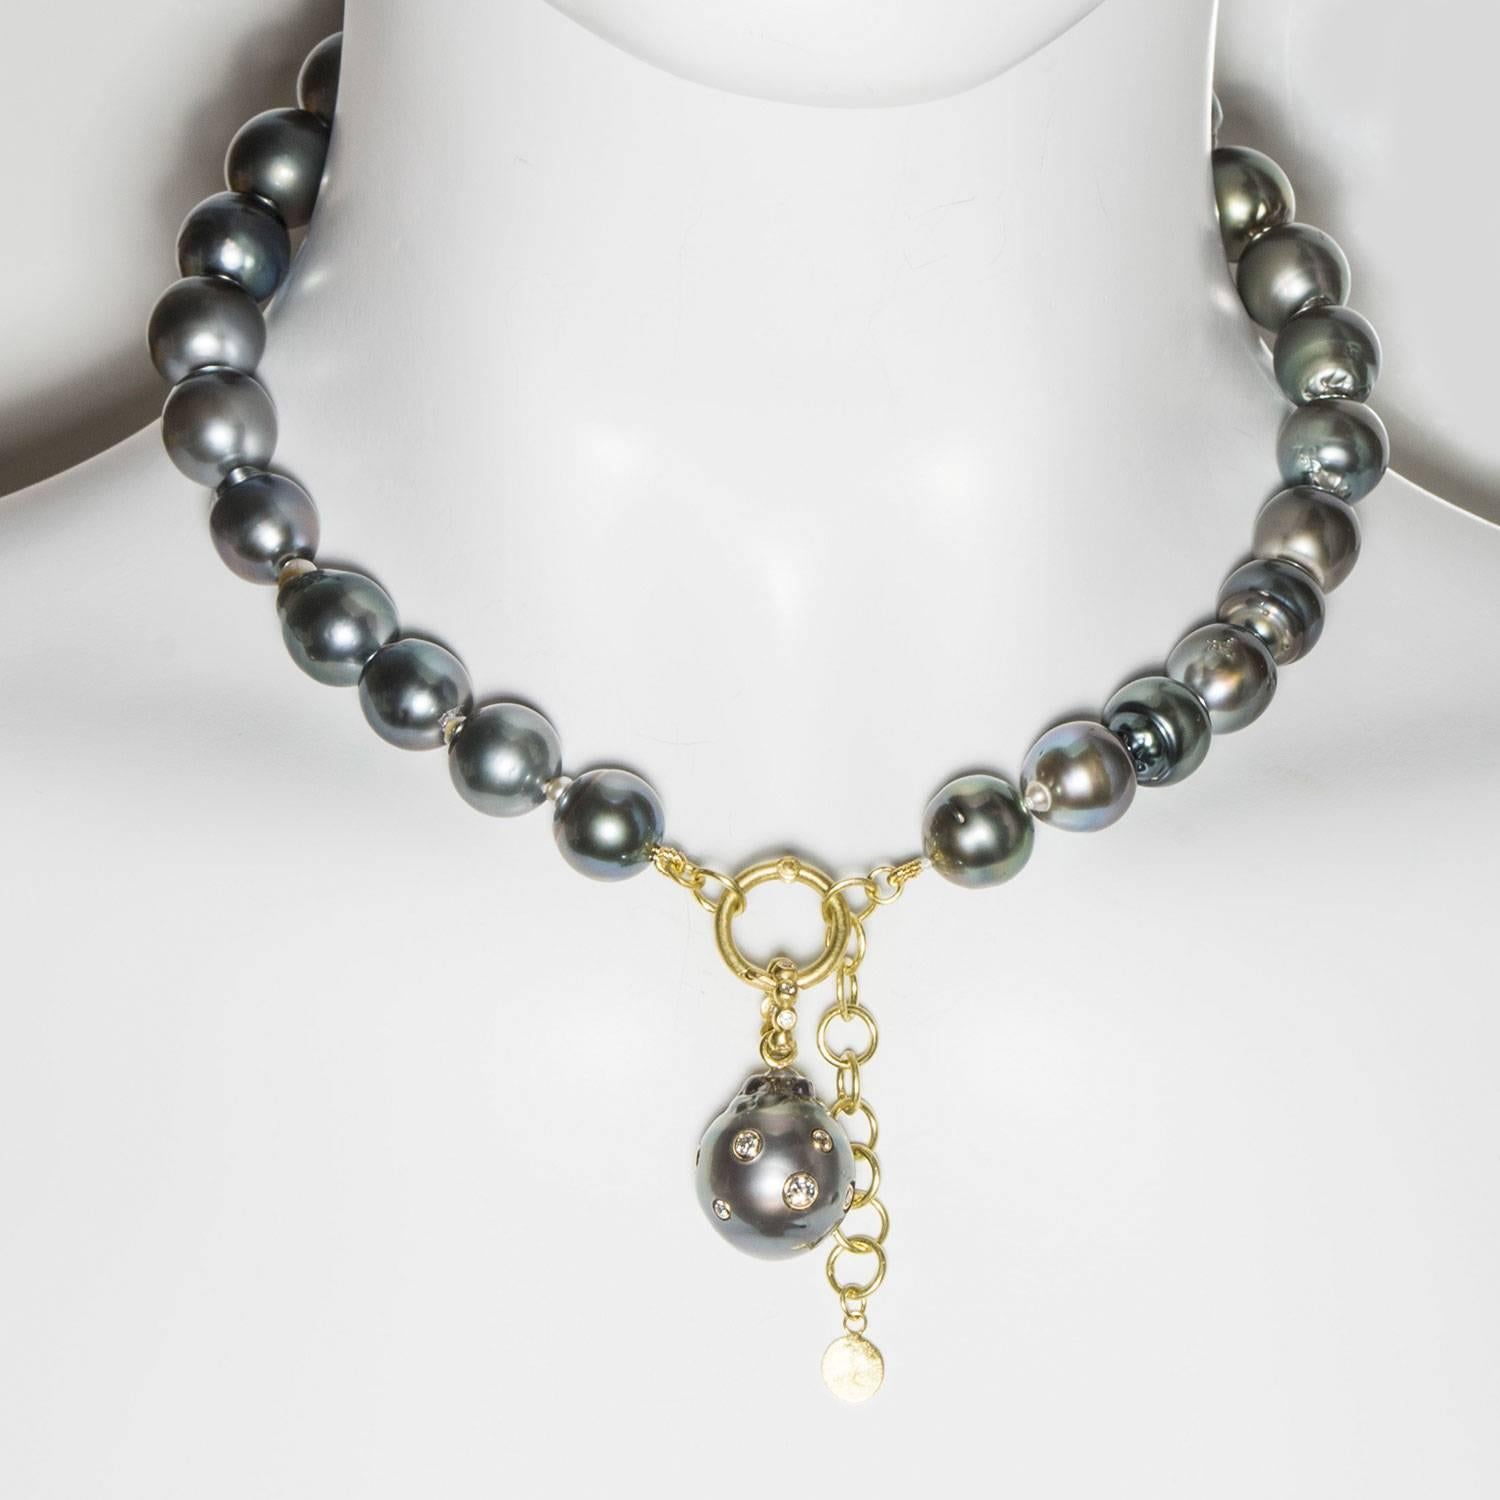 Make a statement with a classic black Tahitian baroque cultured pearl necklace. Slightly baroque in shape with soft overtones of silver and green, the pearl choker is perfect for today's casual and sophisticated style.  It is finished with an 18k